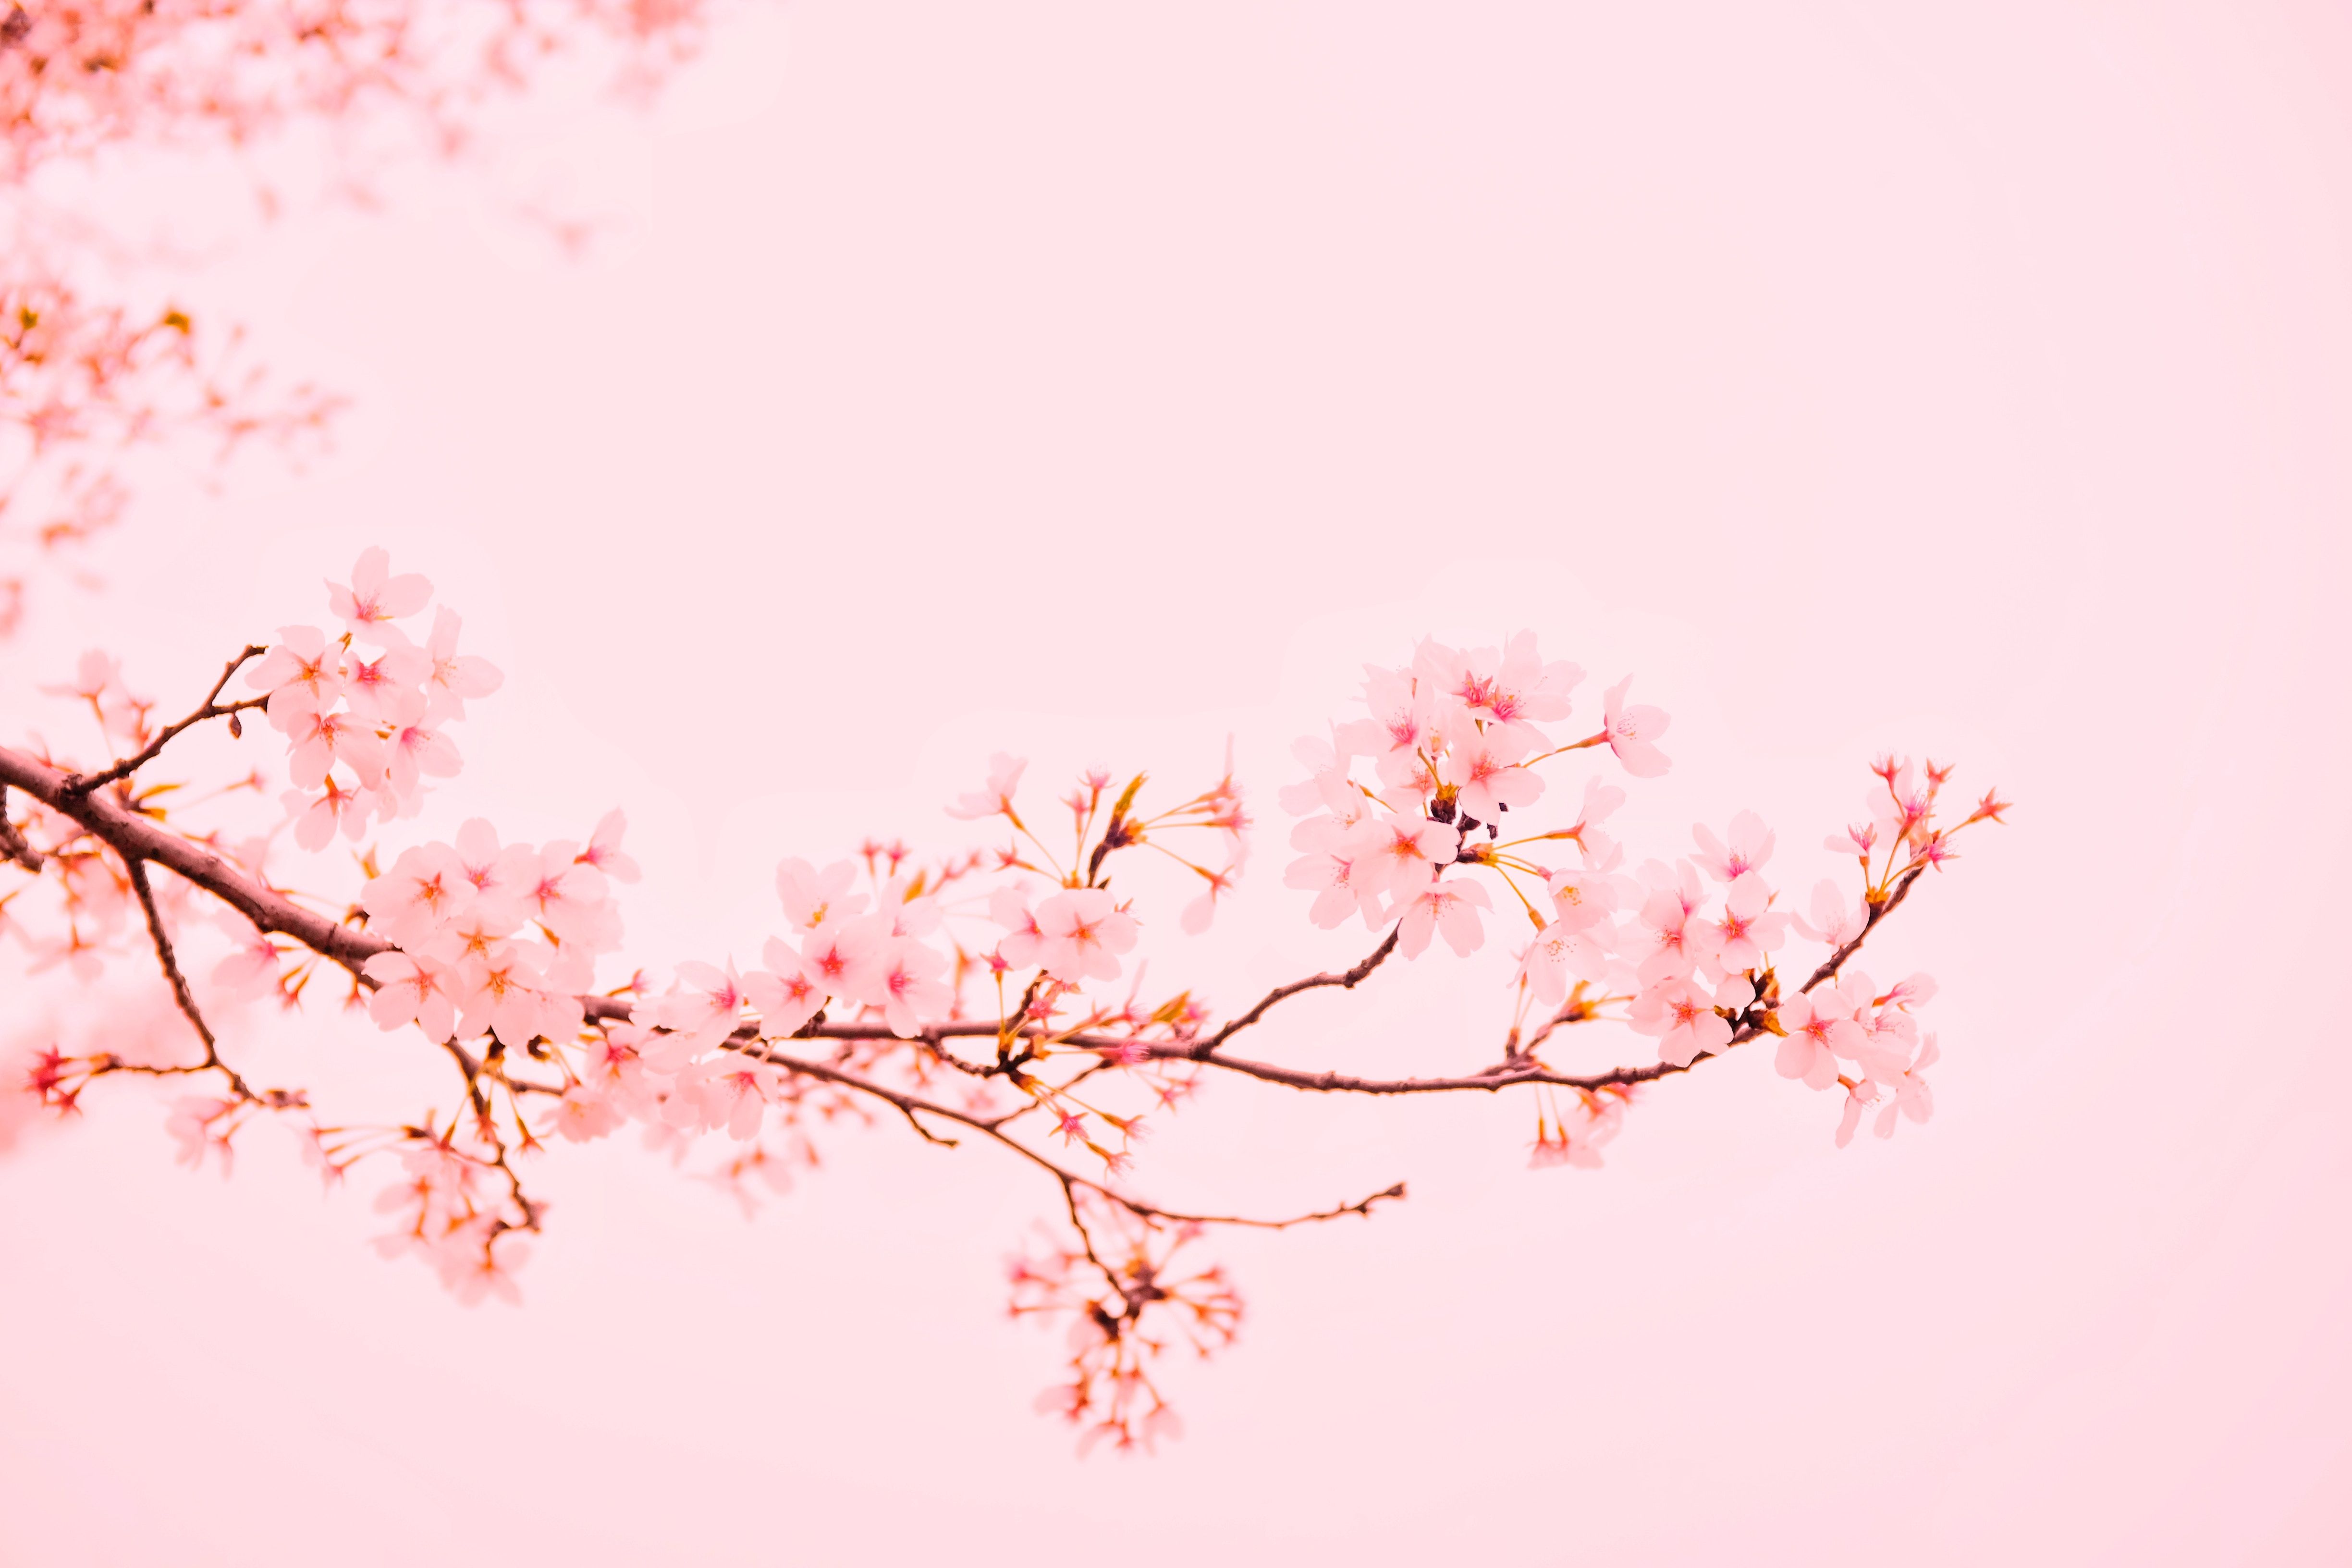 Wallpaper White Cherry Blossom in Close up Photography, Background Free Image